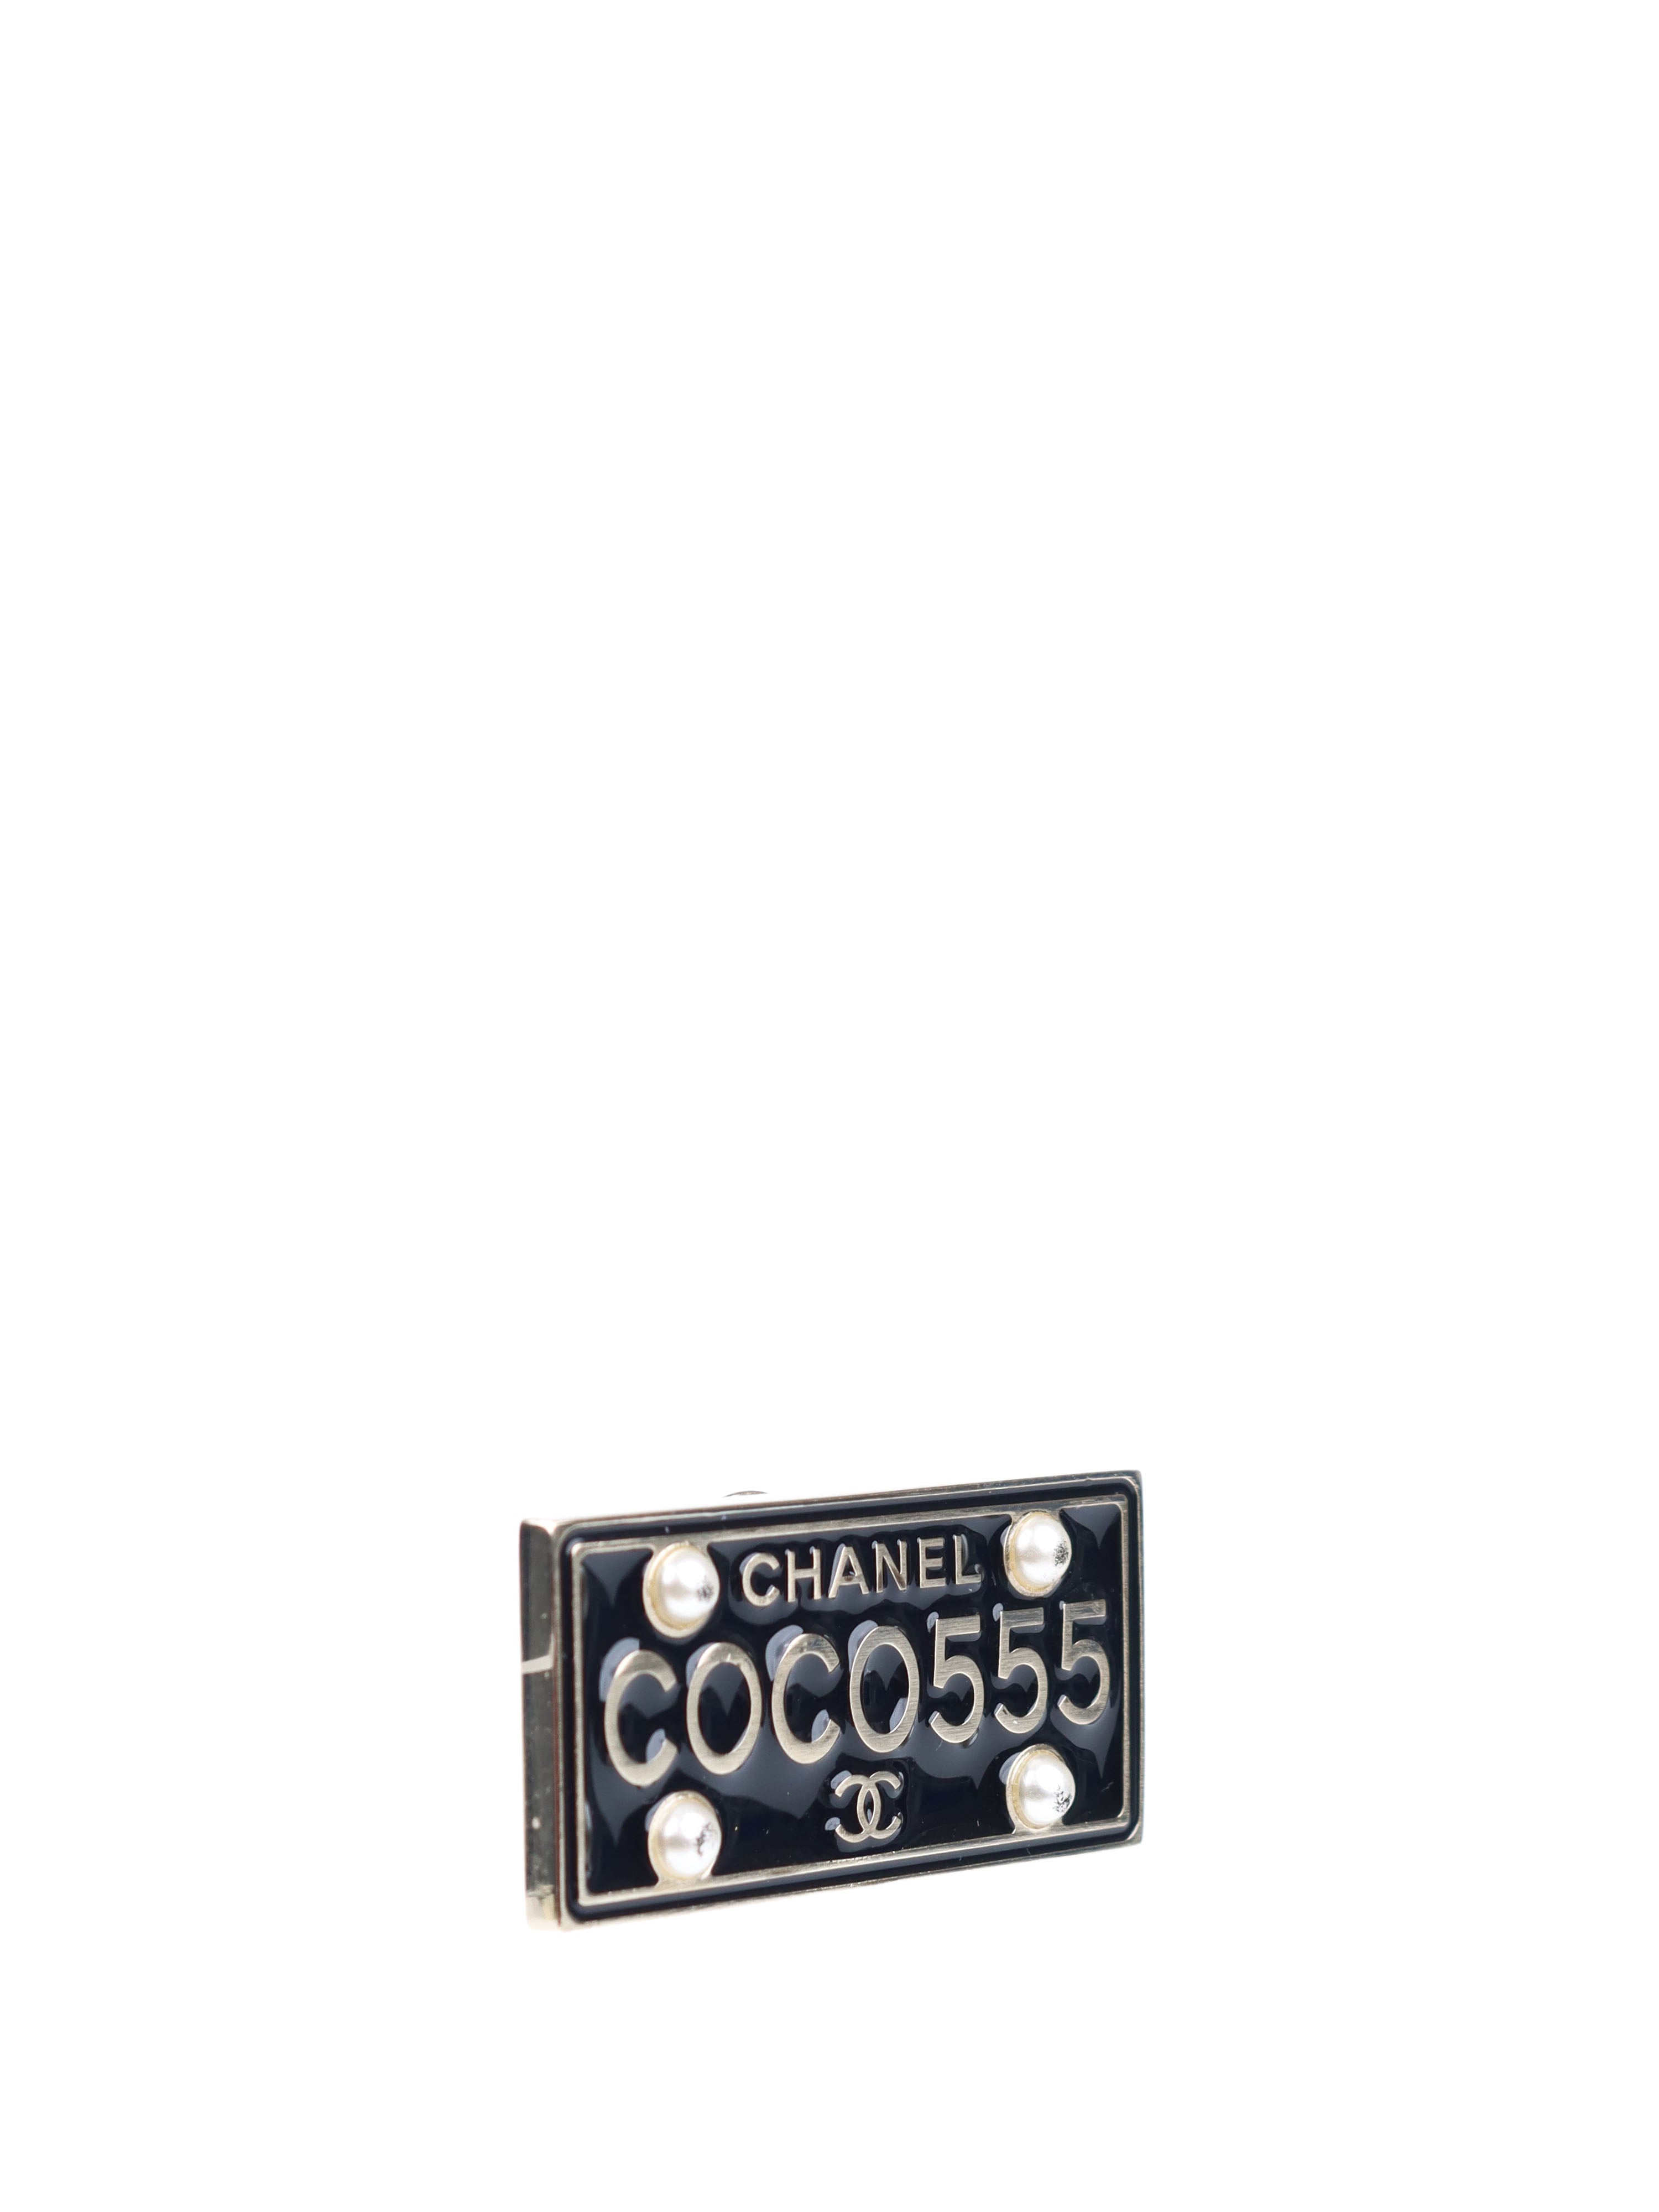 Chanel Black and Gold Coco 555 Brooch